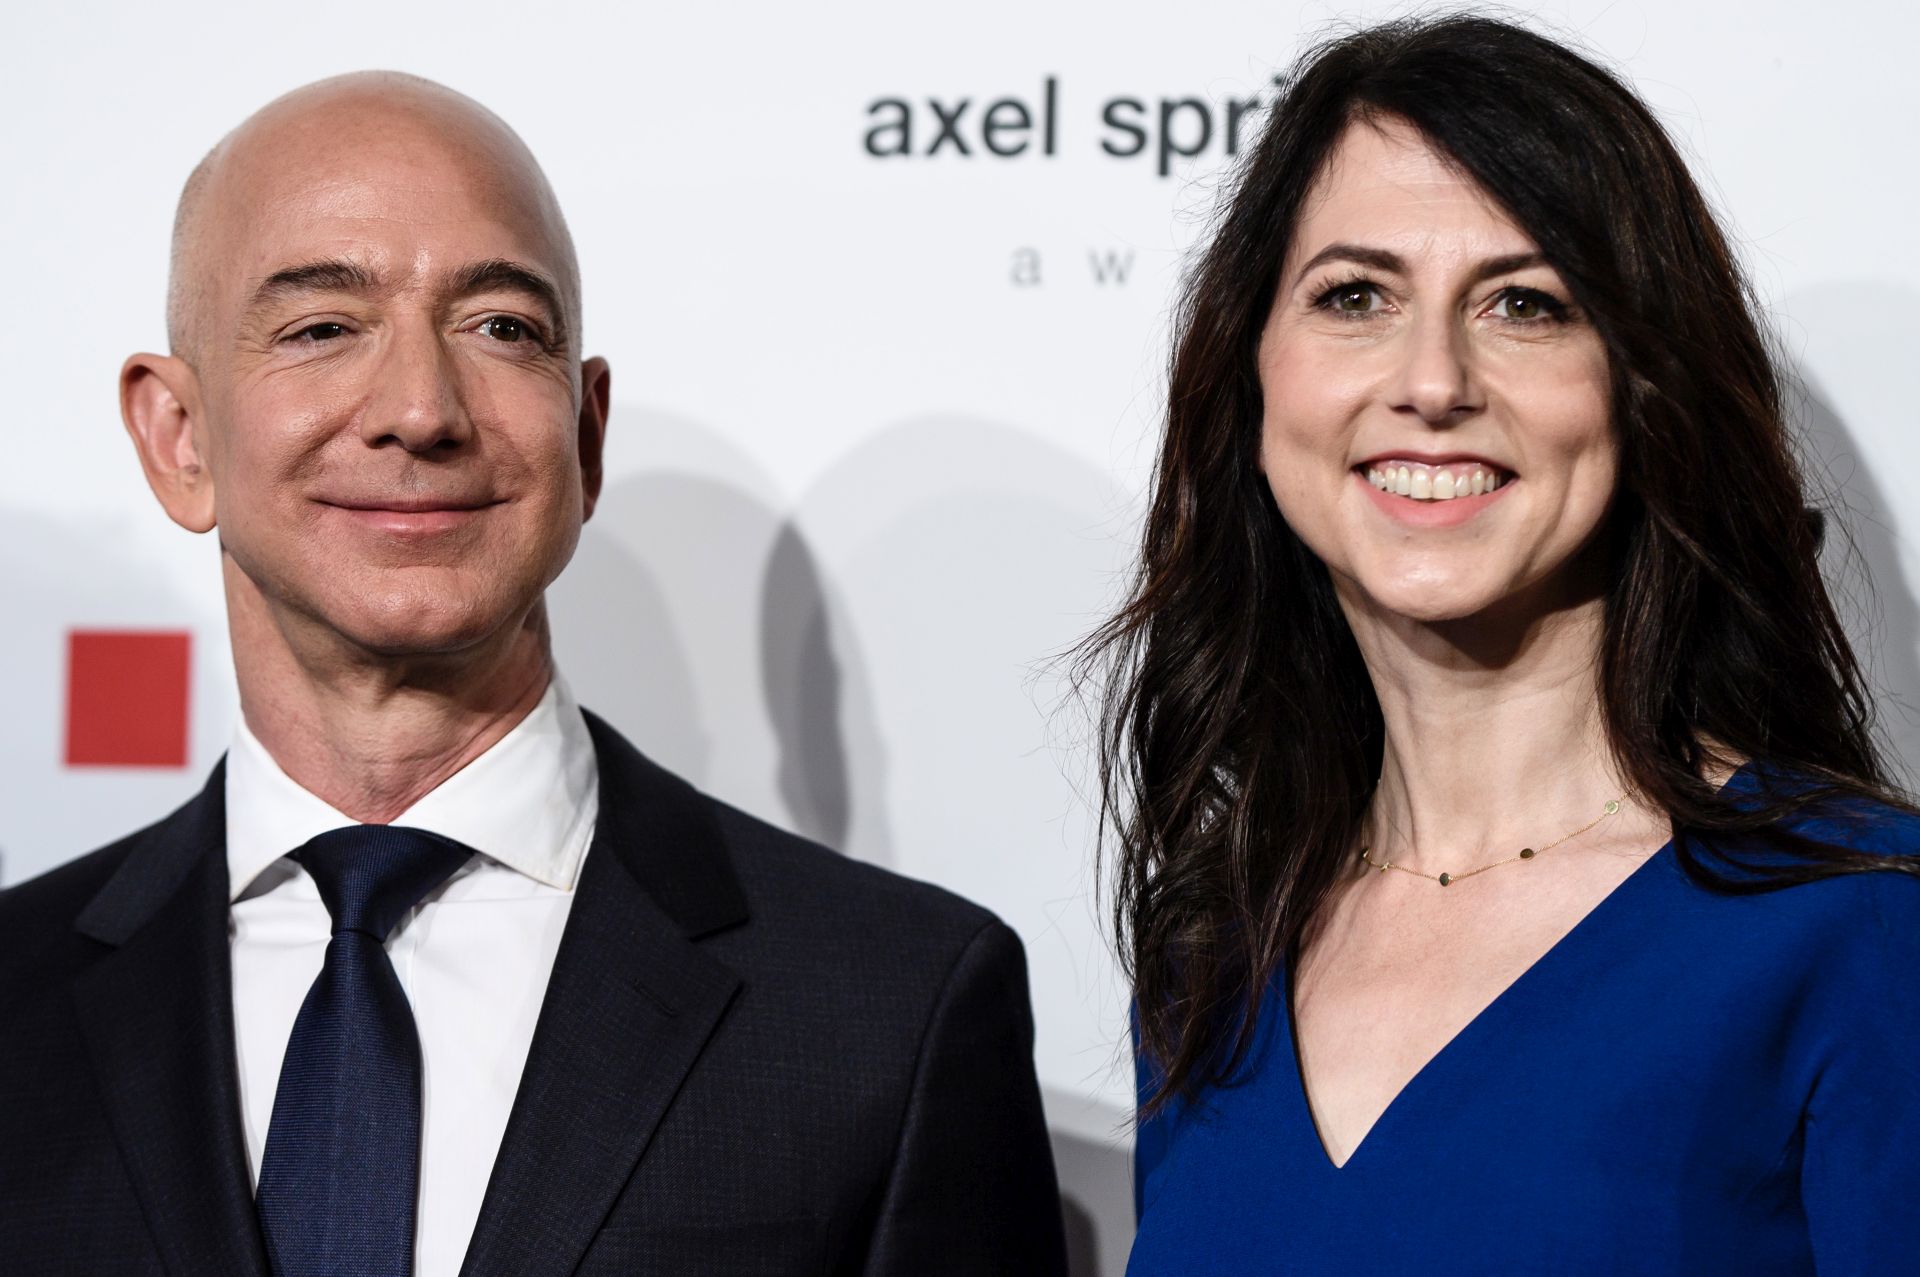 epa07271500 (FILE) - Amazon CEO Jeff Bezos (L) and his wife MacKenzie Bezos attend the Axel Springer Award 2018, in Berlin, Germany, 24 April 2018 (reissued 09 January 2019). According to media reports, Jeff Bezos and his wife MacKenzie Bezos are divorcing.  EPA/CLEMENS BILAN